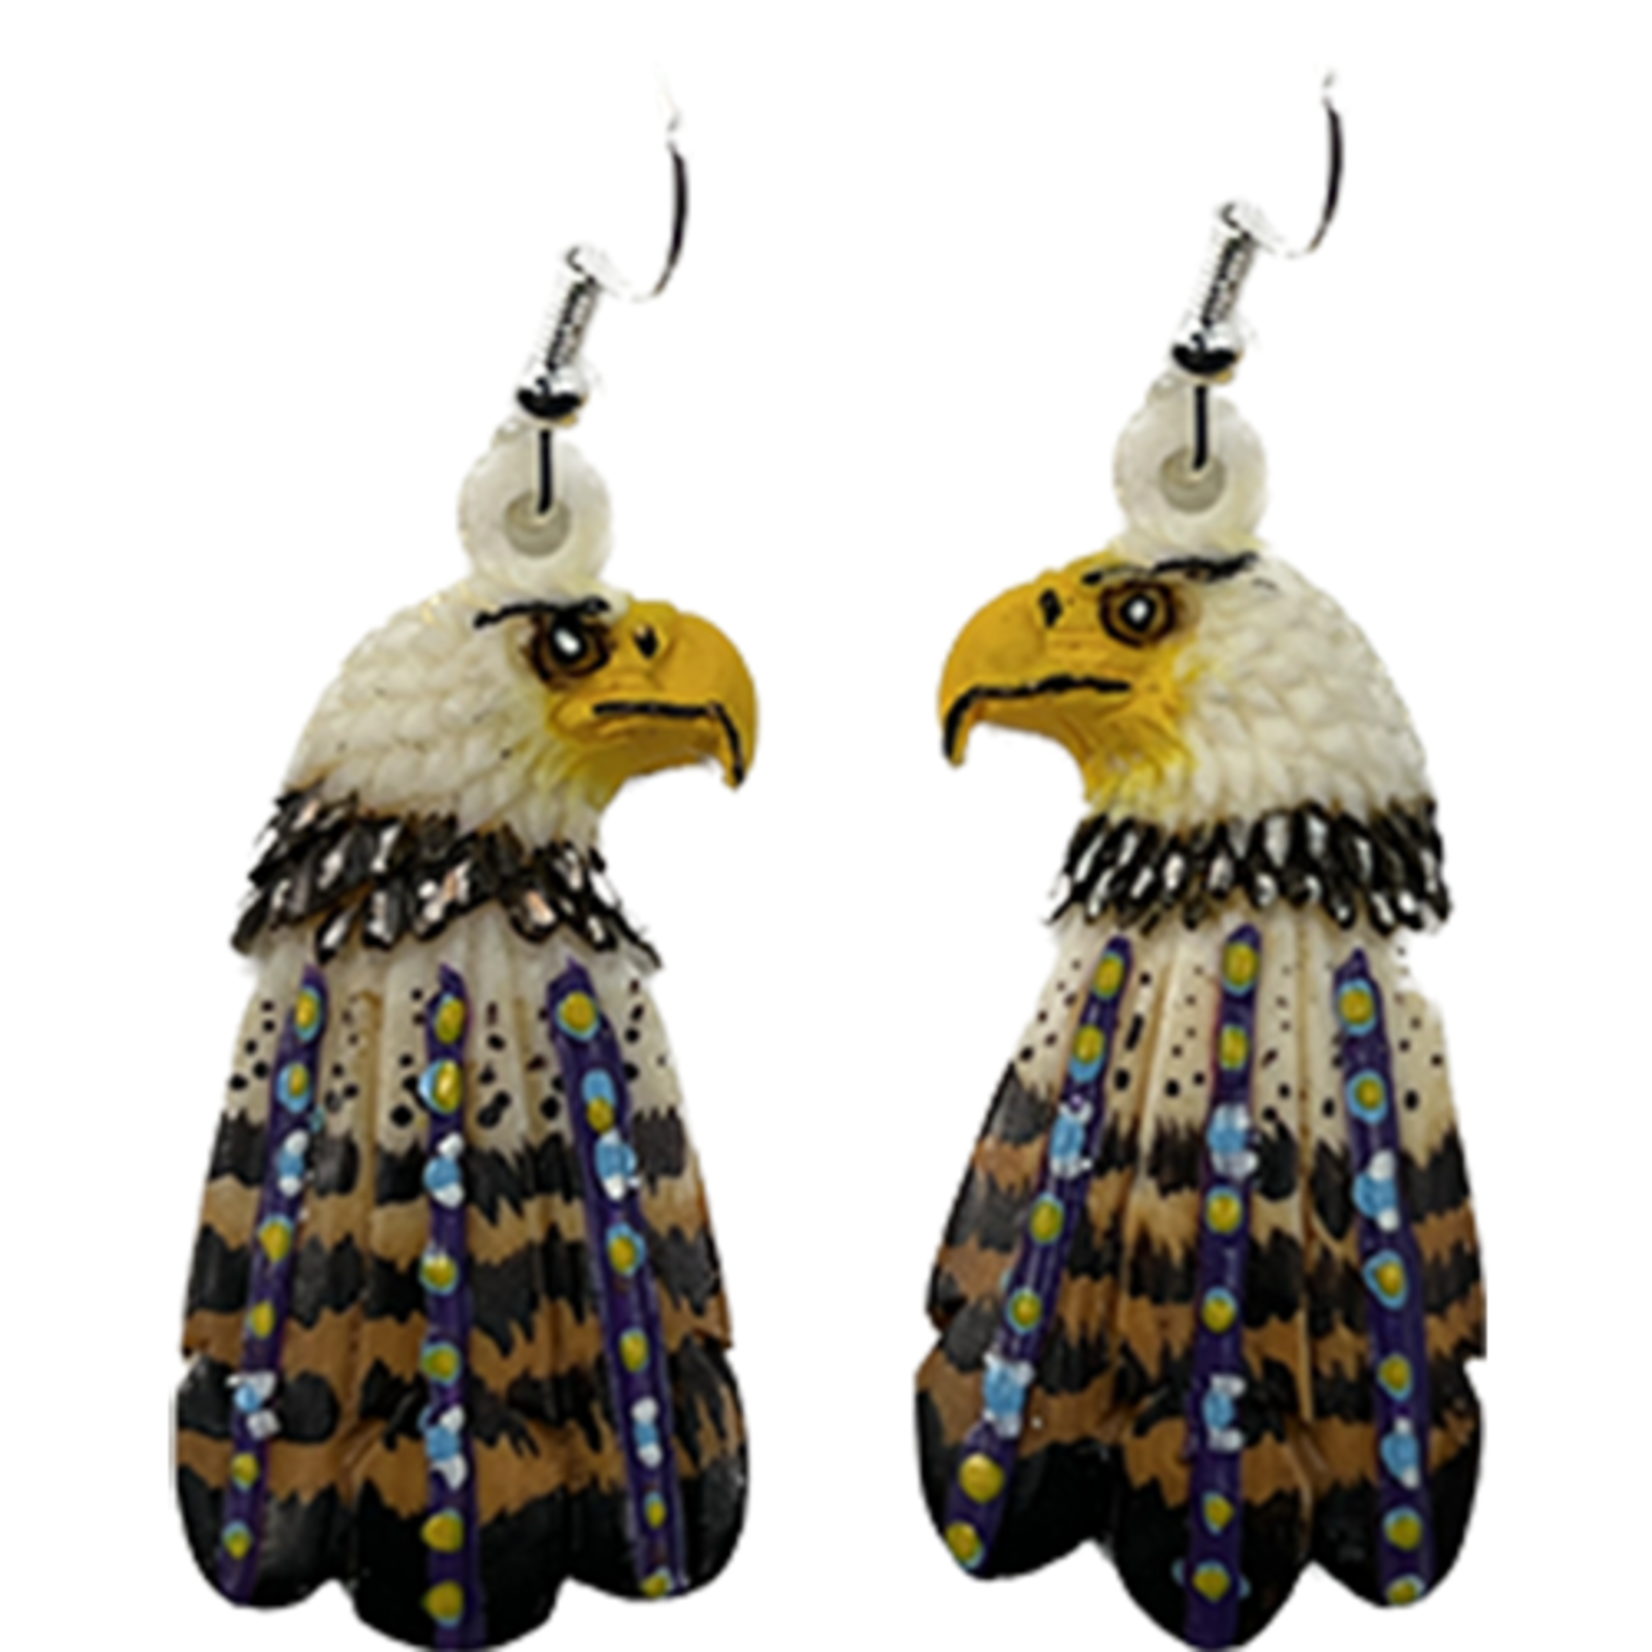 CARVED BONE EARRING - EAGLE WITH FEATHERS